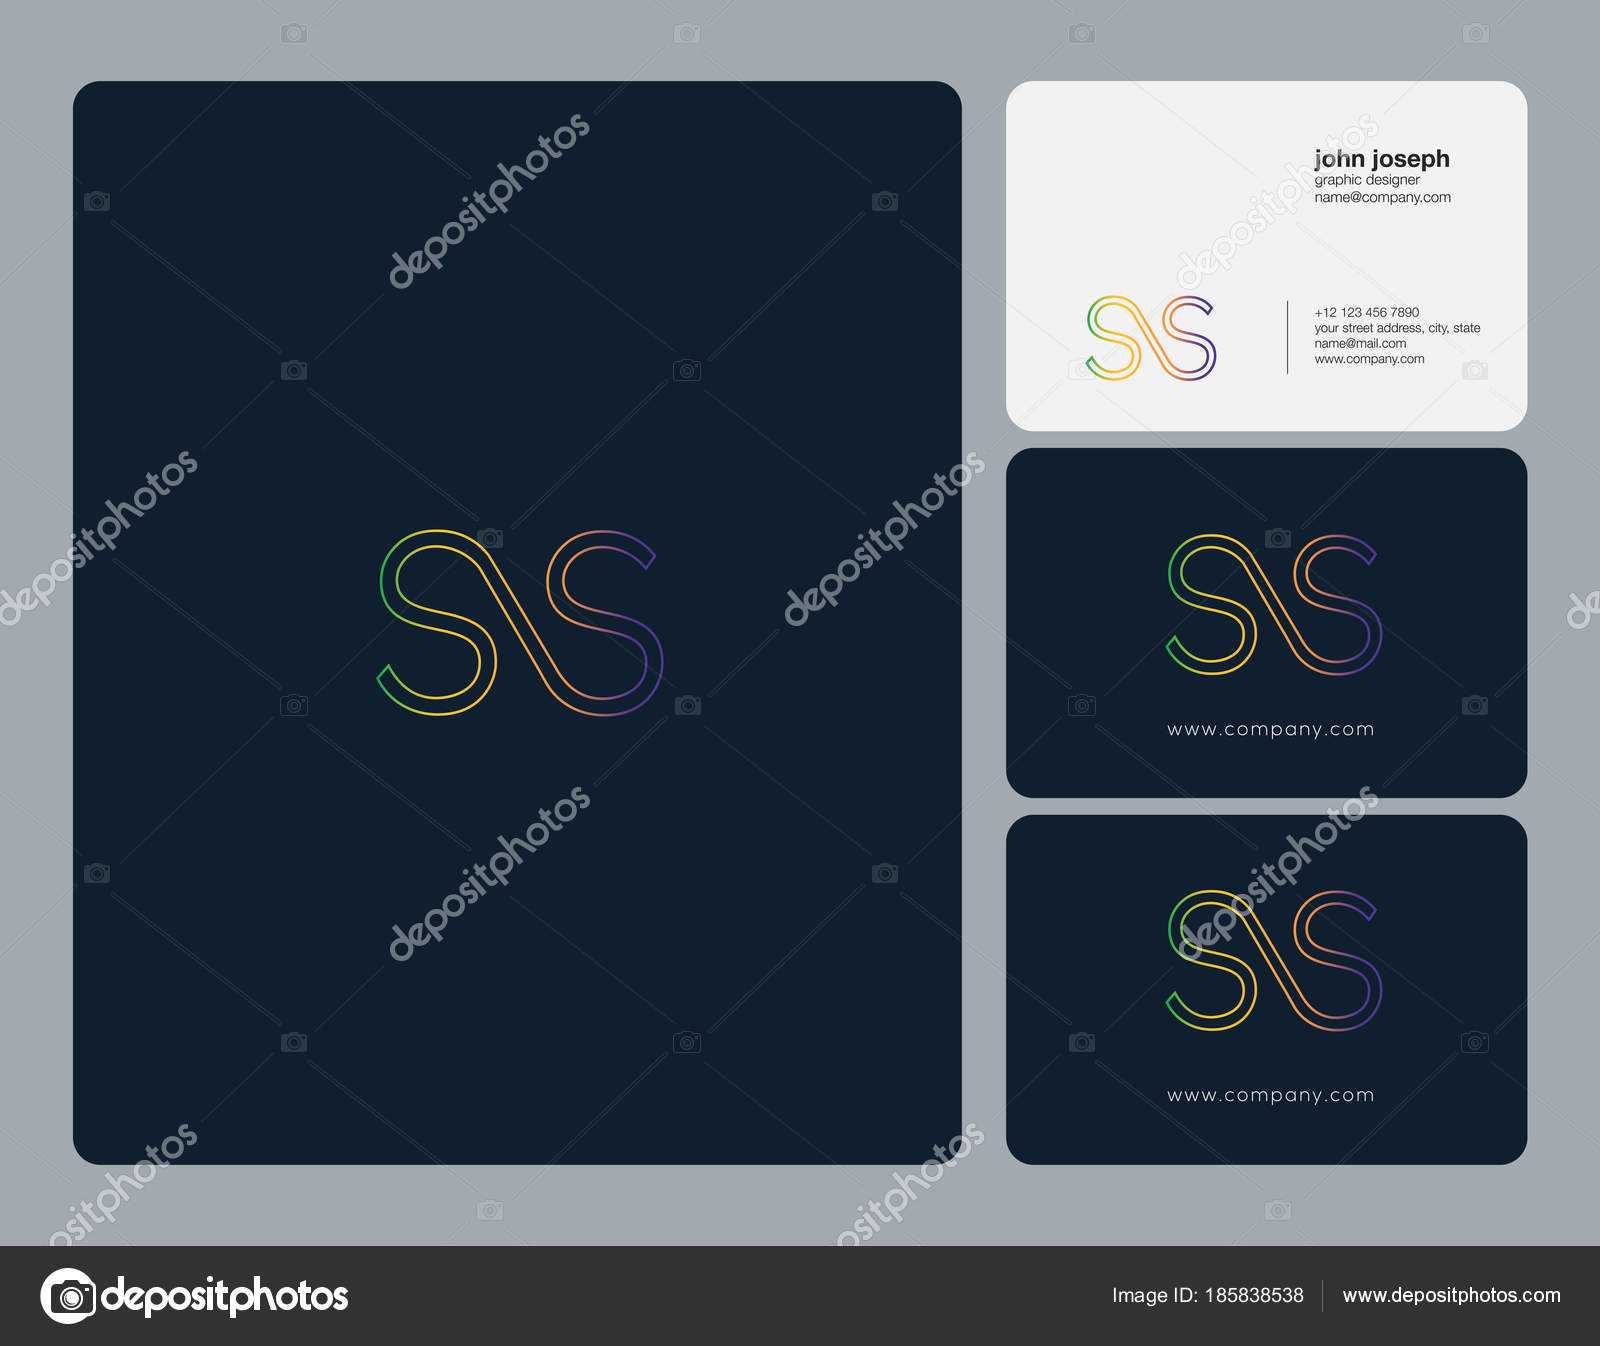 Ss Card Template | Joint Letters Logo Business Card Template Regarding Ss Card Template